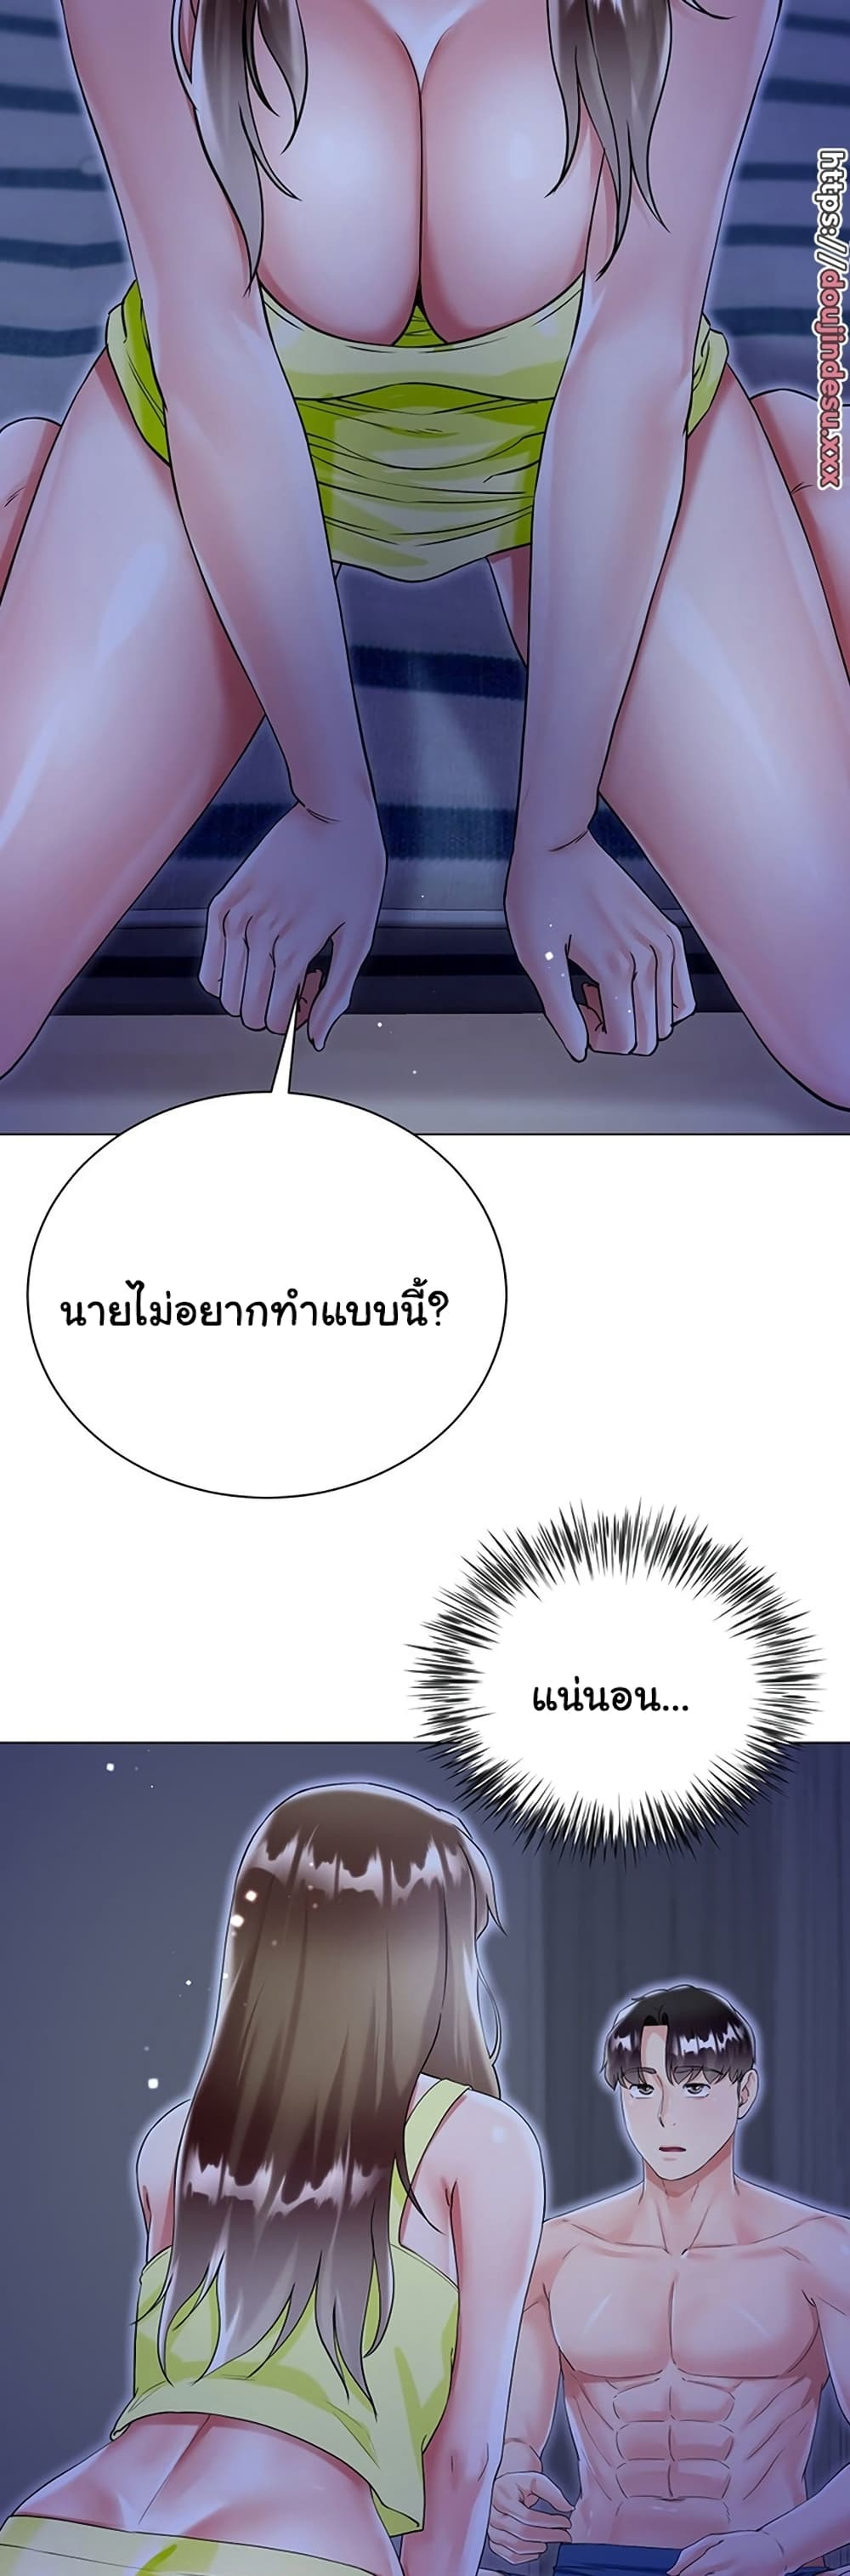 My Sister-in-law’s Skirt 42 ภาพที่ 39